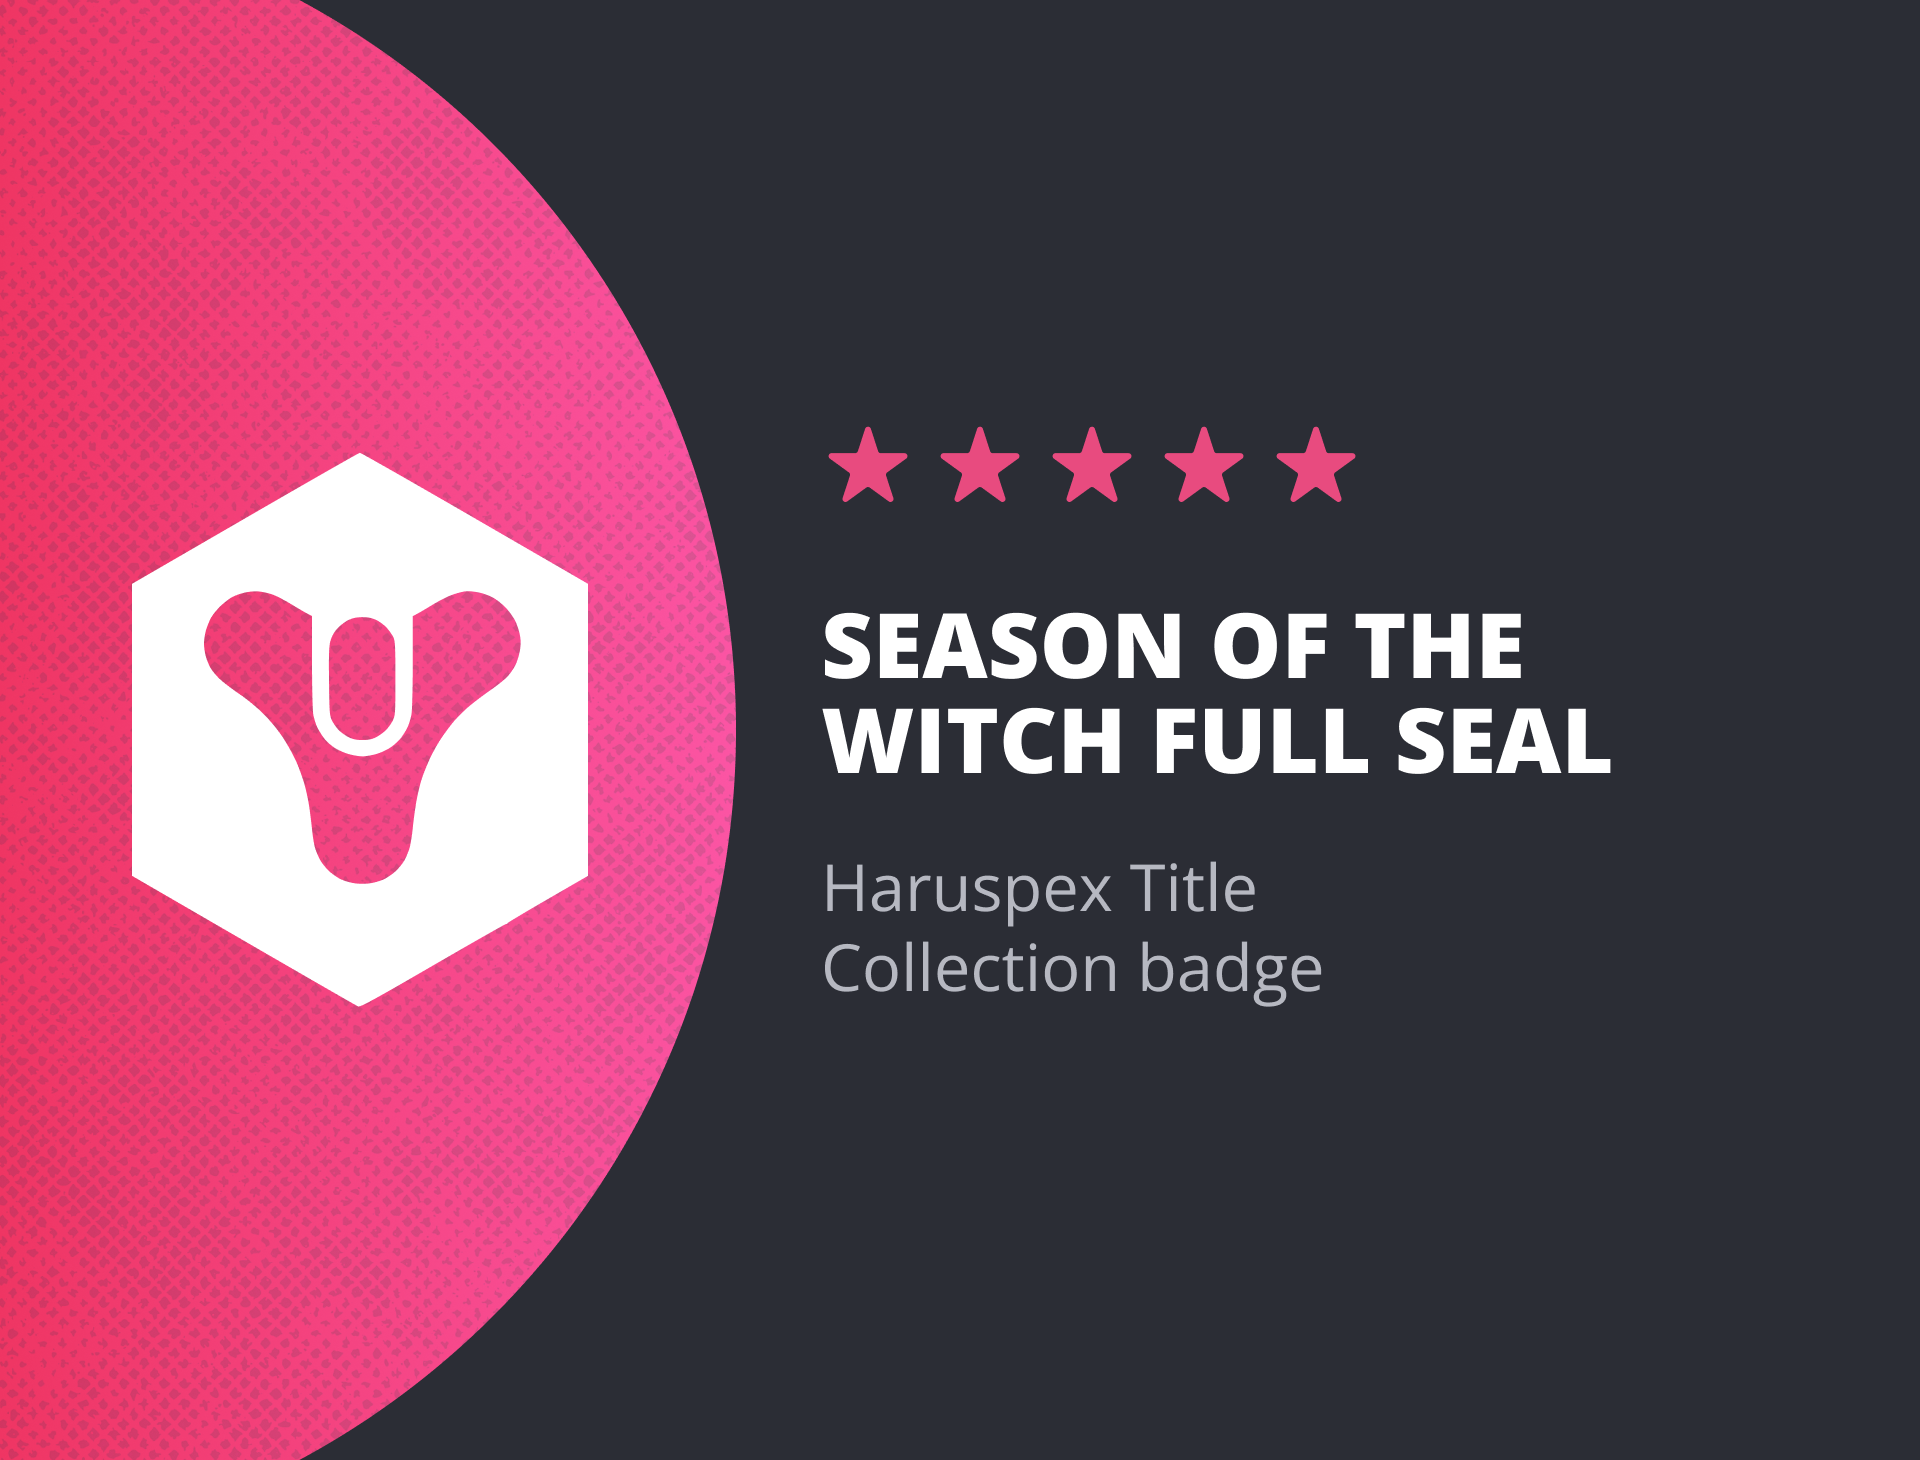 Season of the Witch Full Seal (Haruspex Title)